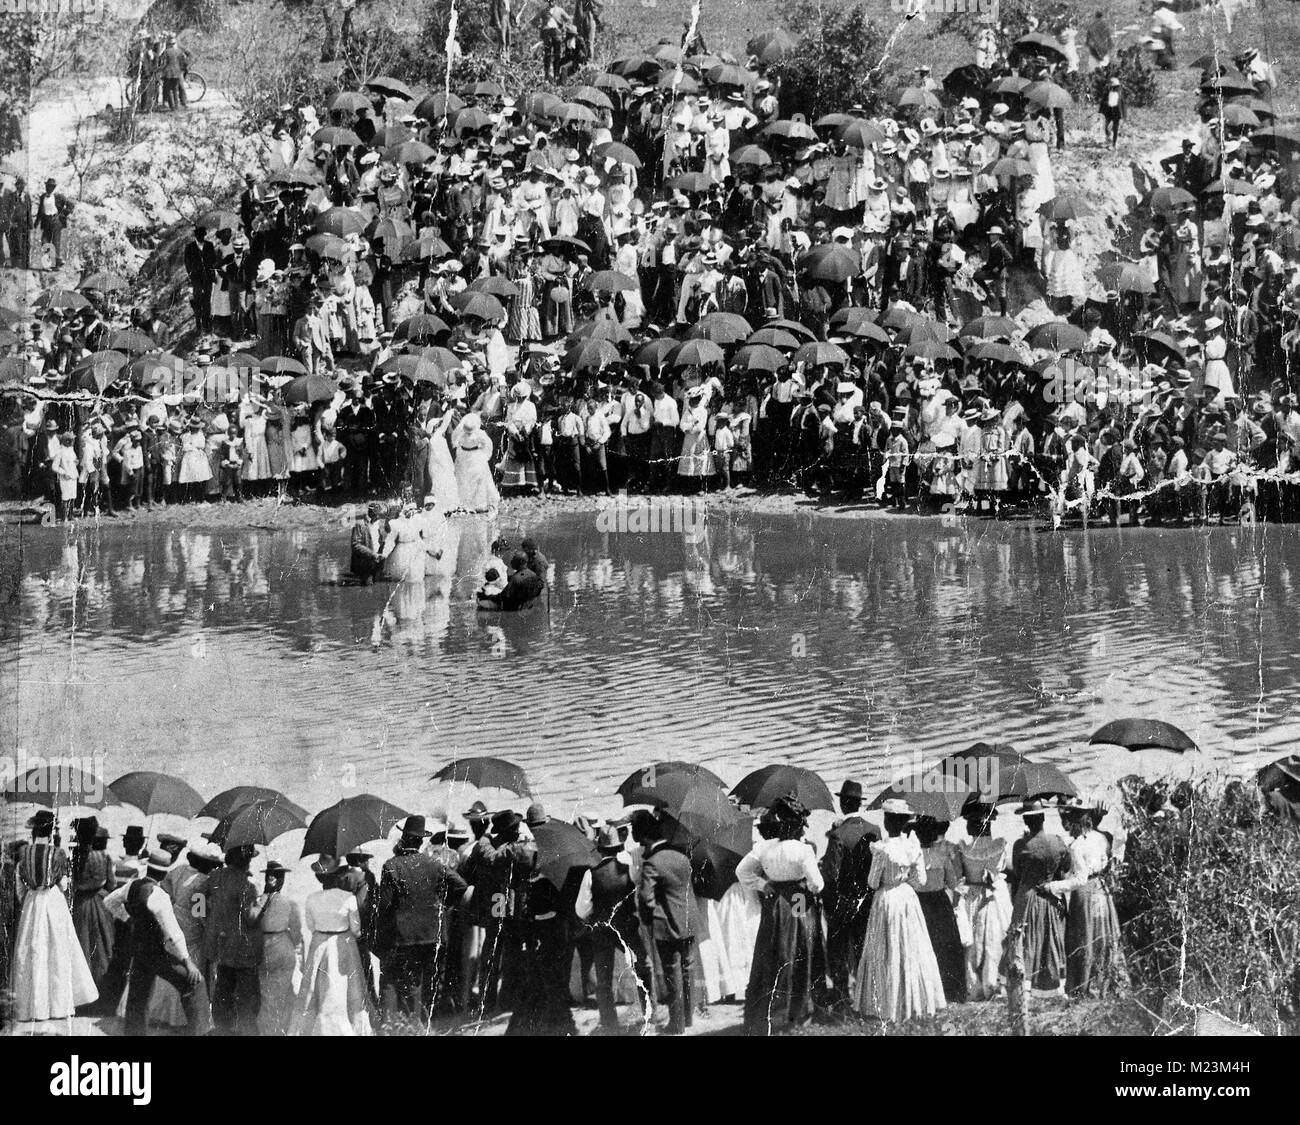 A large group of African-American spectators stands on the banks of Buffalo Bayou to witness a baptism. Many umbrellas are present indicating an effort to provide some shade from the heat of the day, circa 1900 Stock Photo